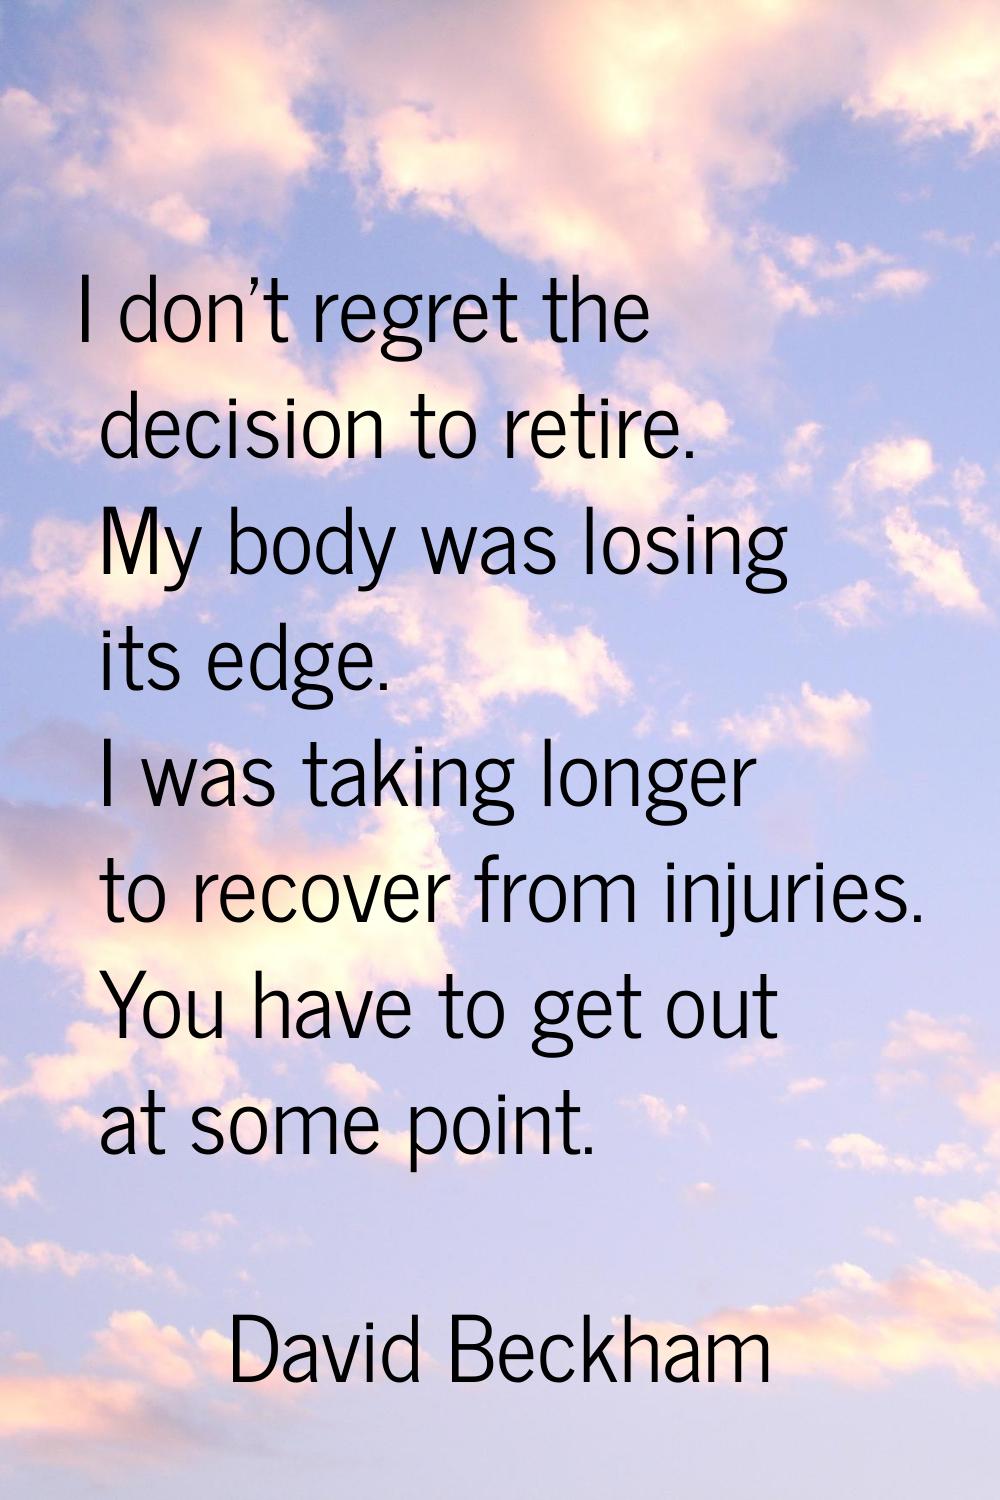 I don't regret the decision to retire. My body was losing its edge. I was taking longer to recover 